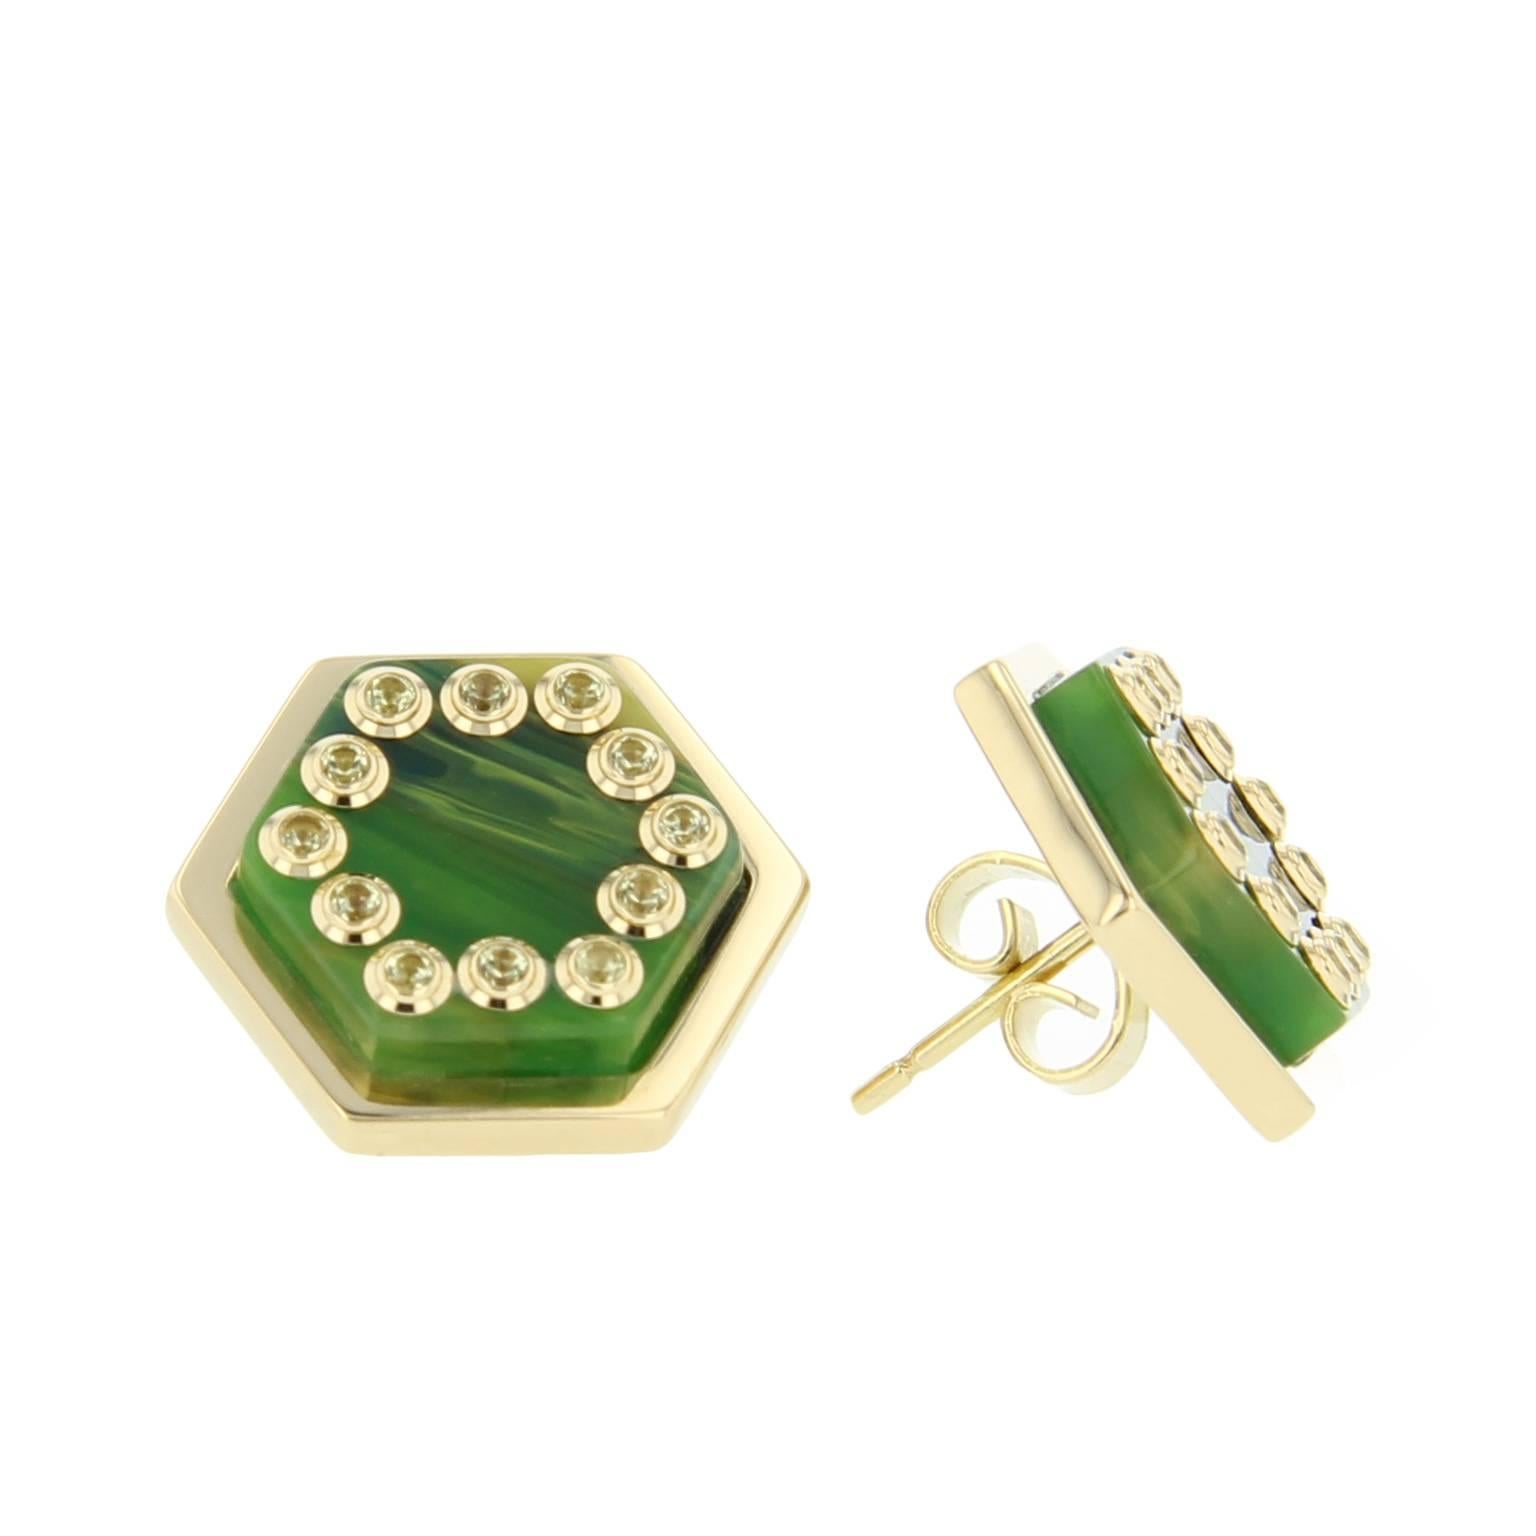 These hexagonal stud earrings were created using laminated, marbled blue and green  bakelite mounted in polished 18k yellow gold bezels. They are set with individual bezel-set peridot set in 18k yellow gold.

Full details below: 
• From of the Mark